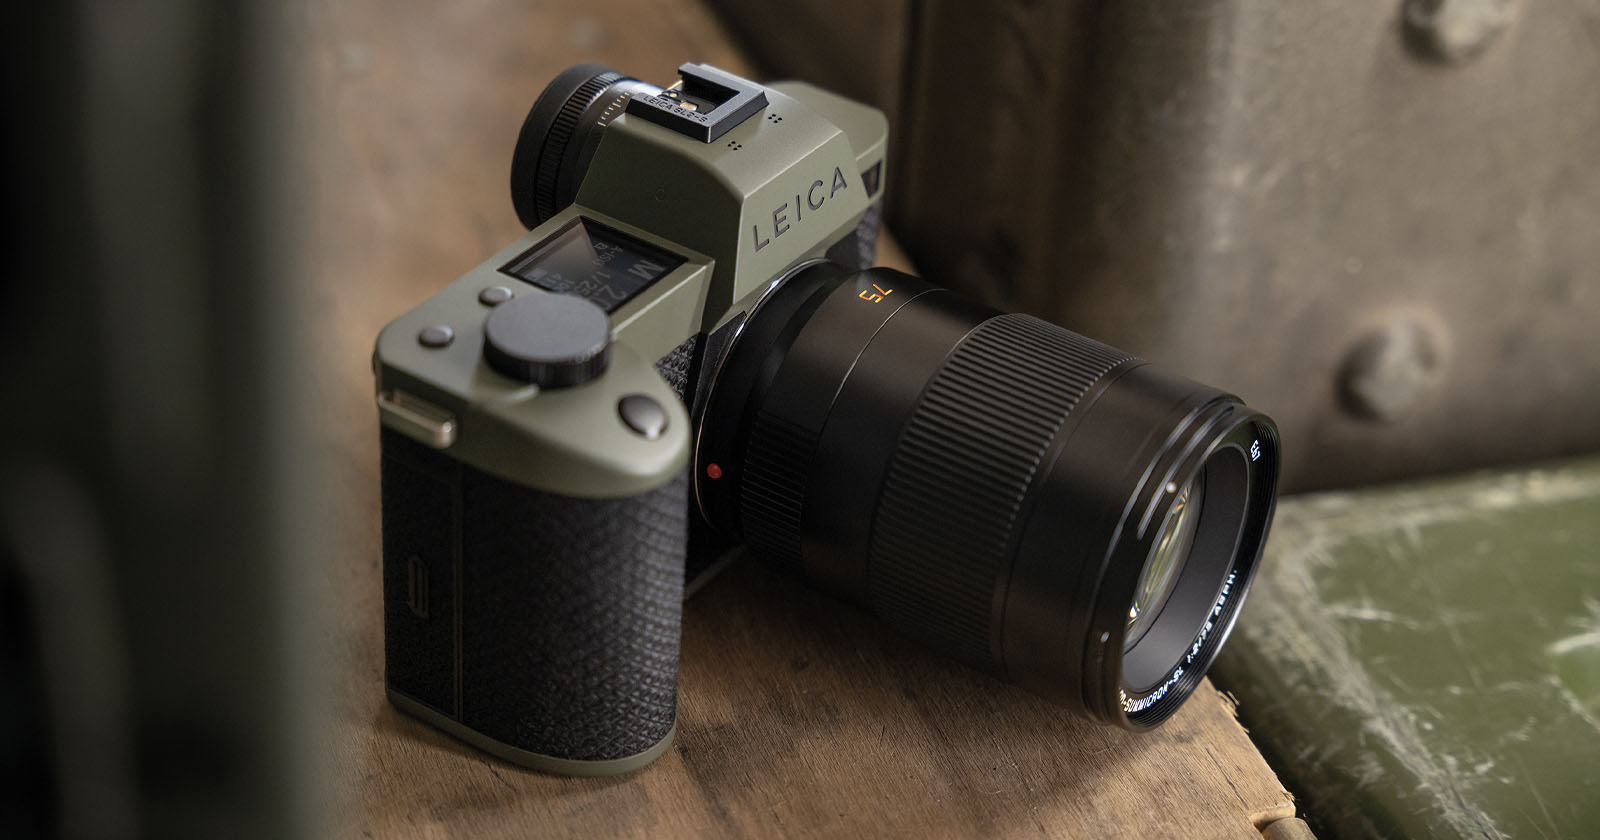 The Leica SL2 S is the Latest Camera to Get the Reporter Treatment